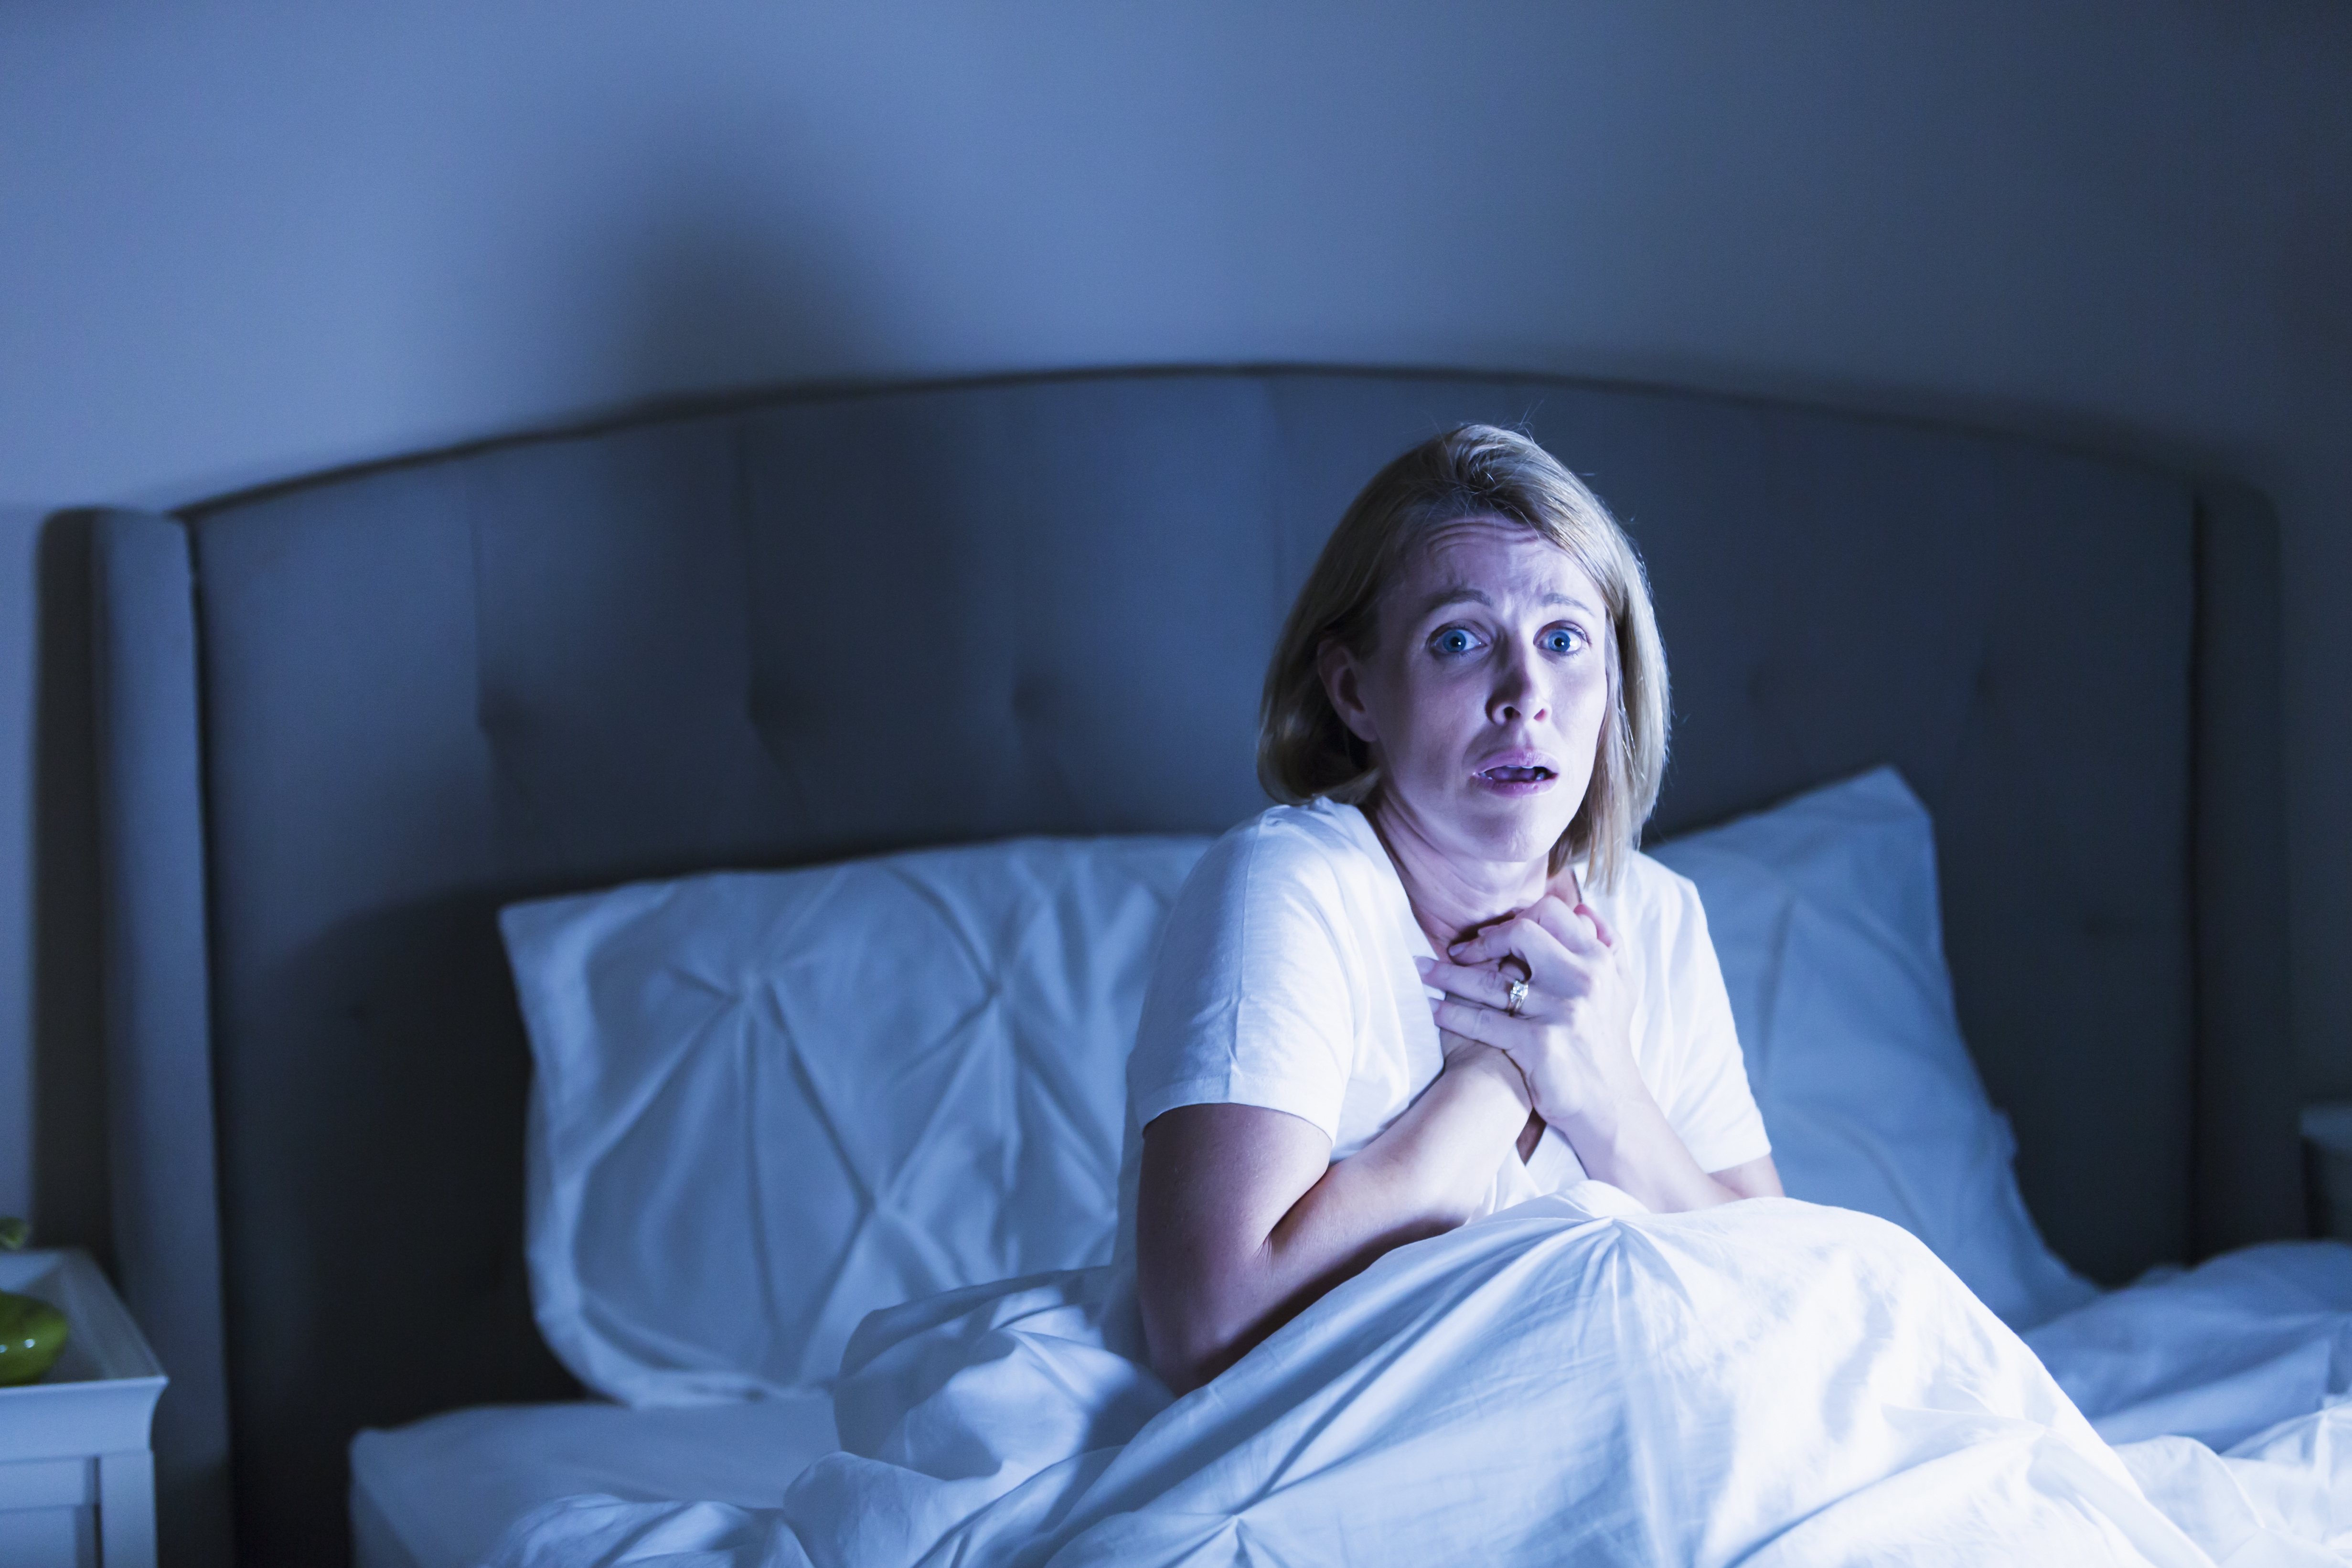 Woman in bed woken up by something frightful | Source: Getty Images